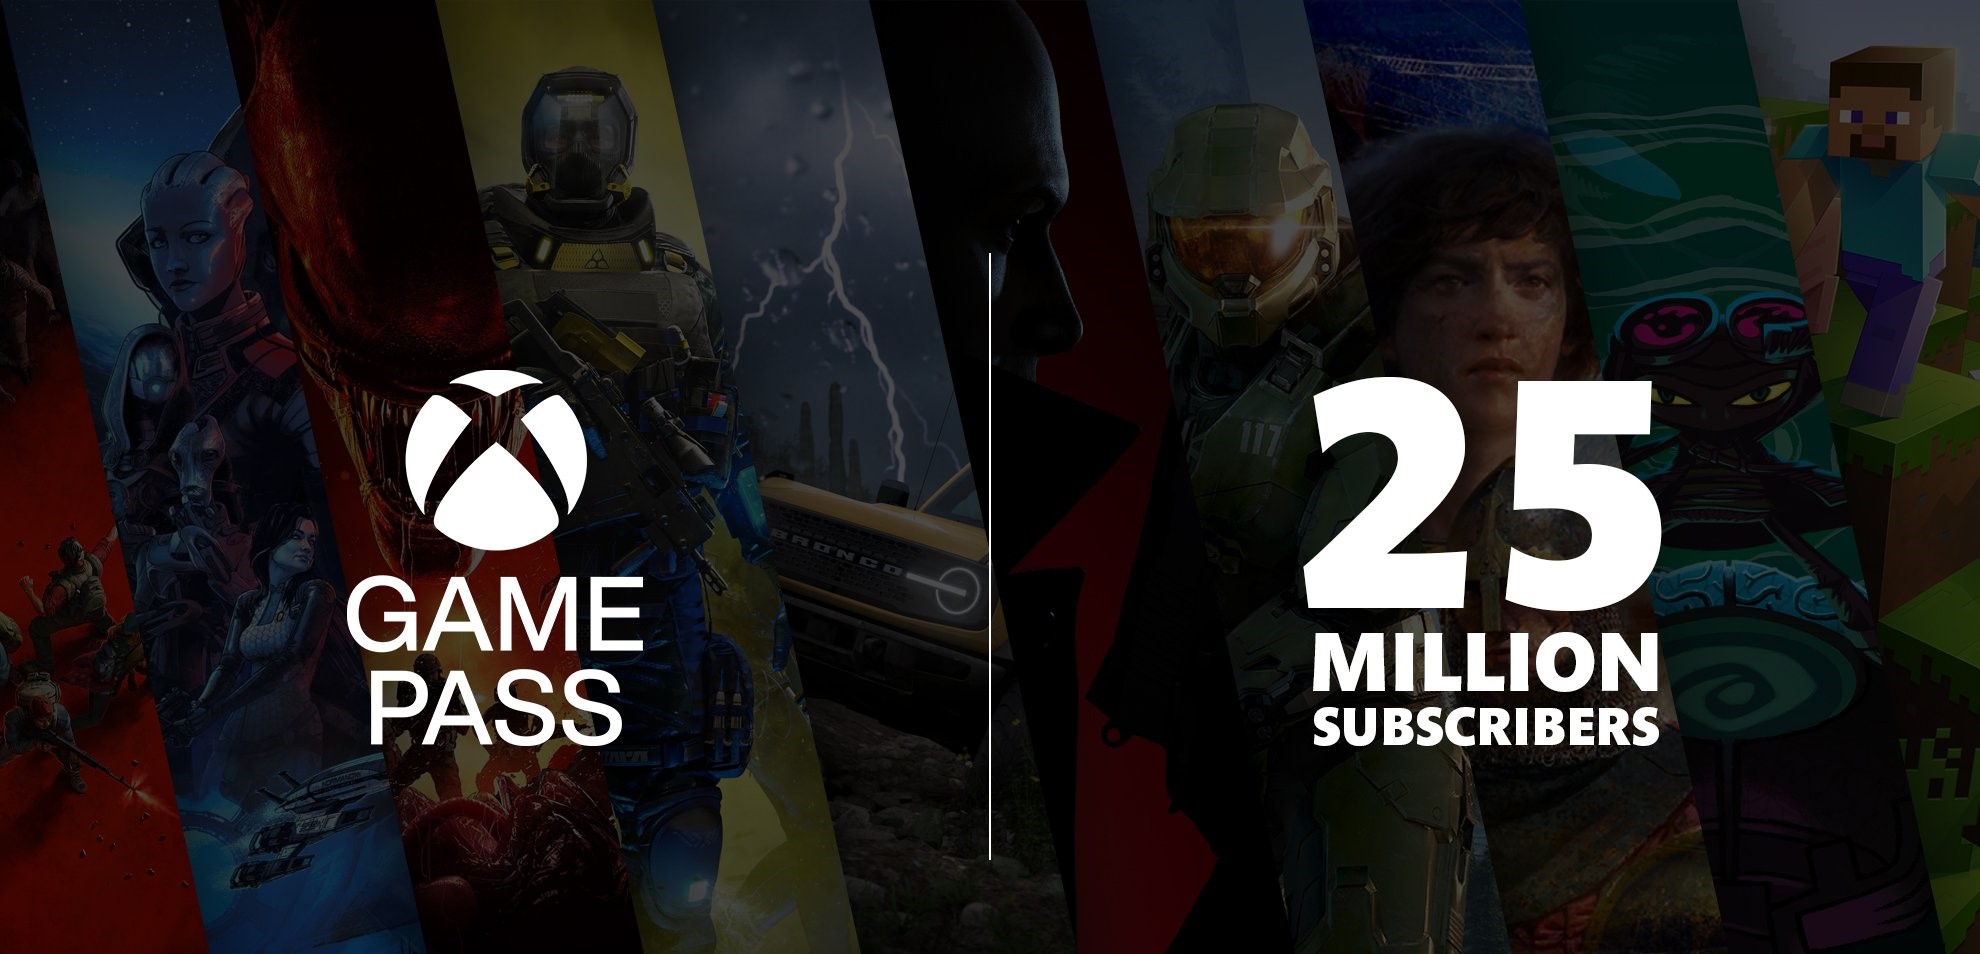 Xbox Game Pass subscribers